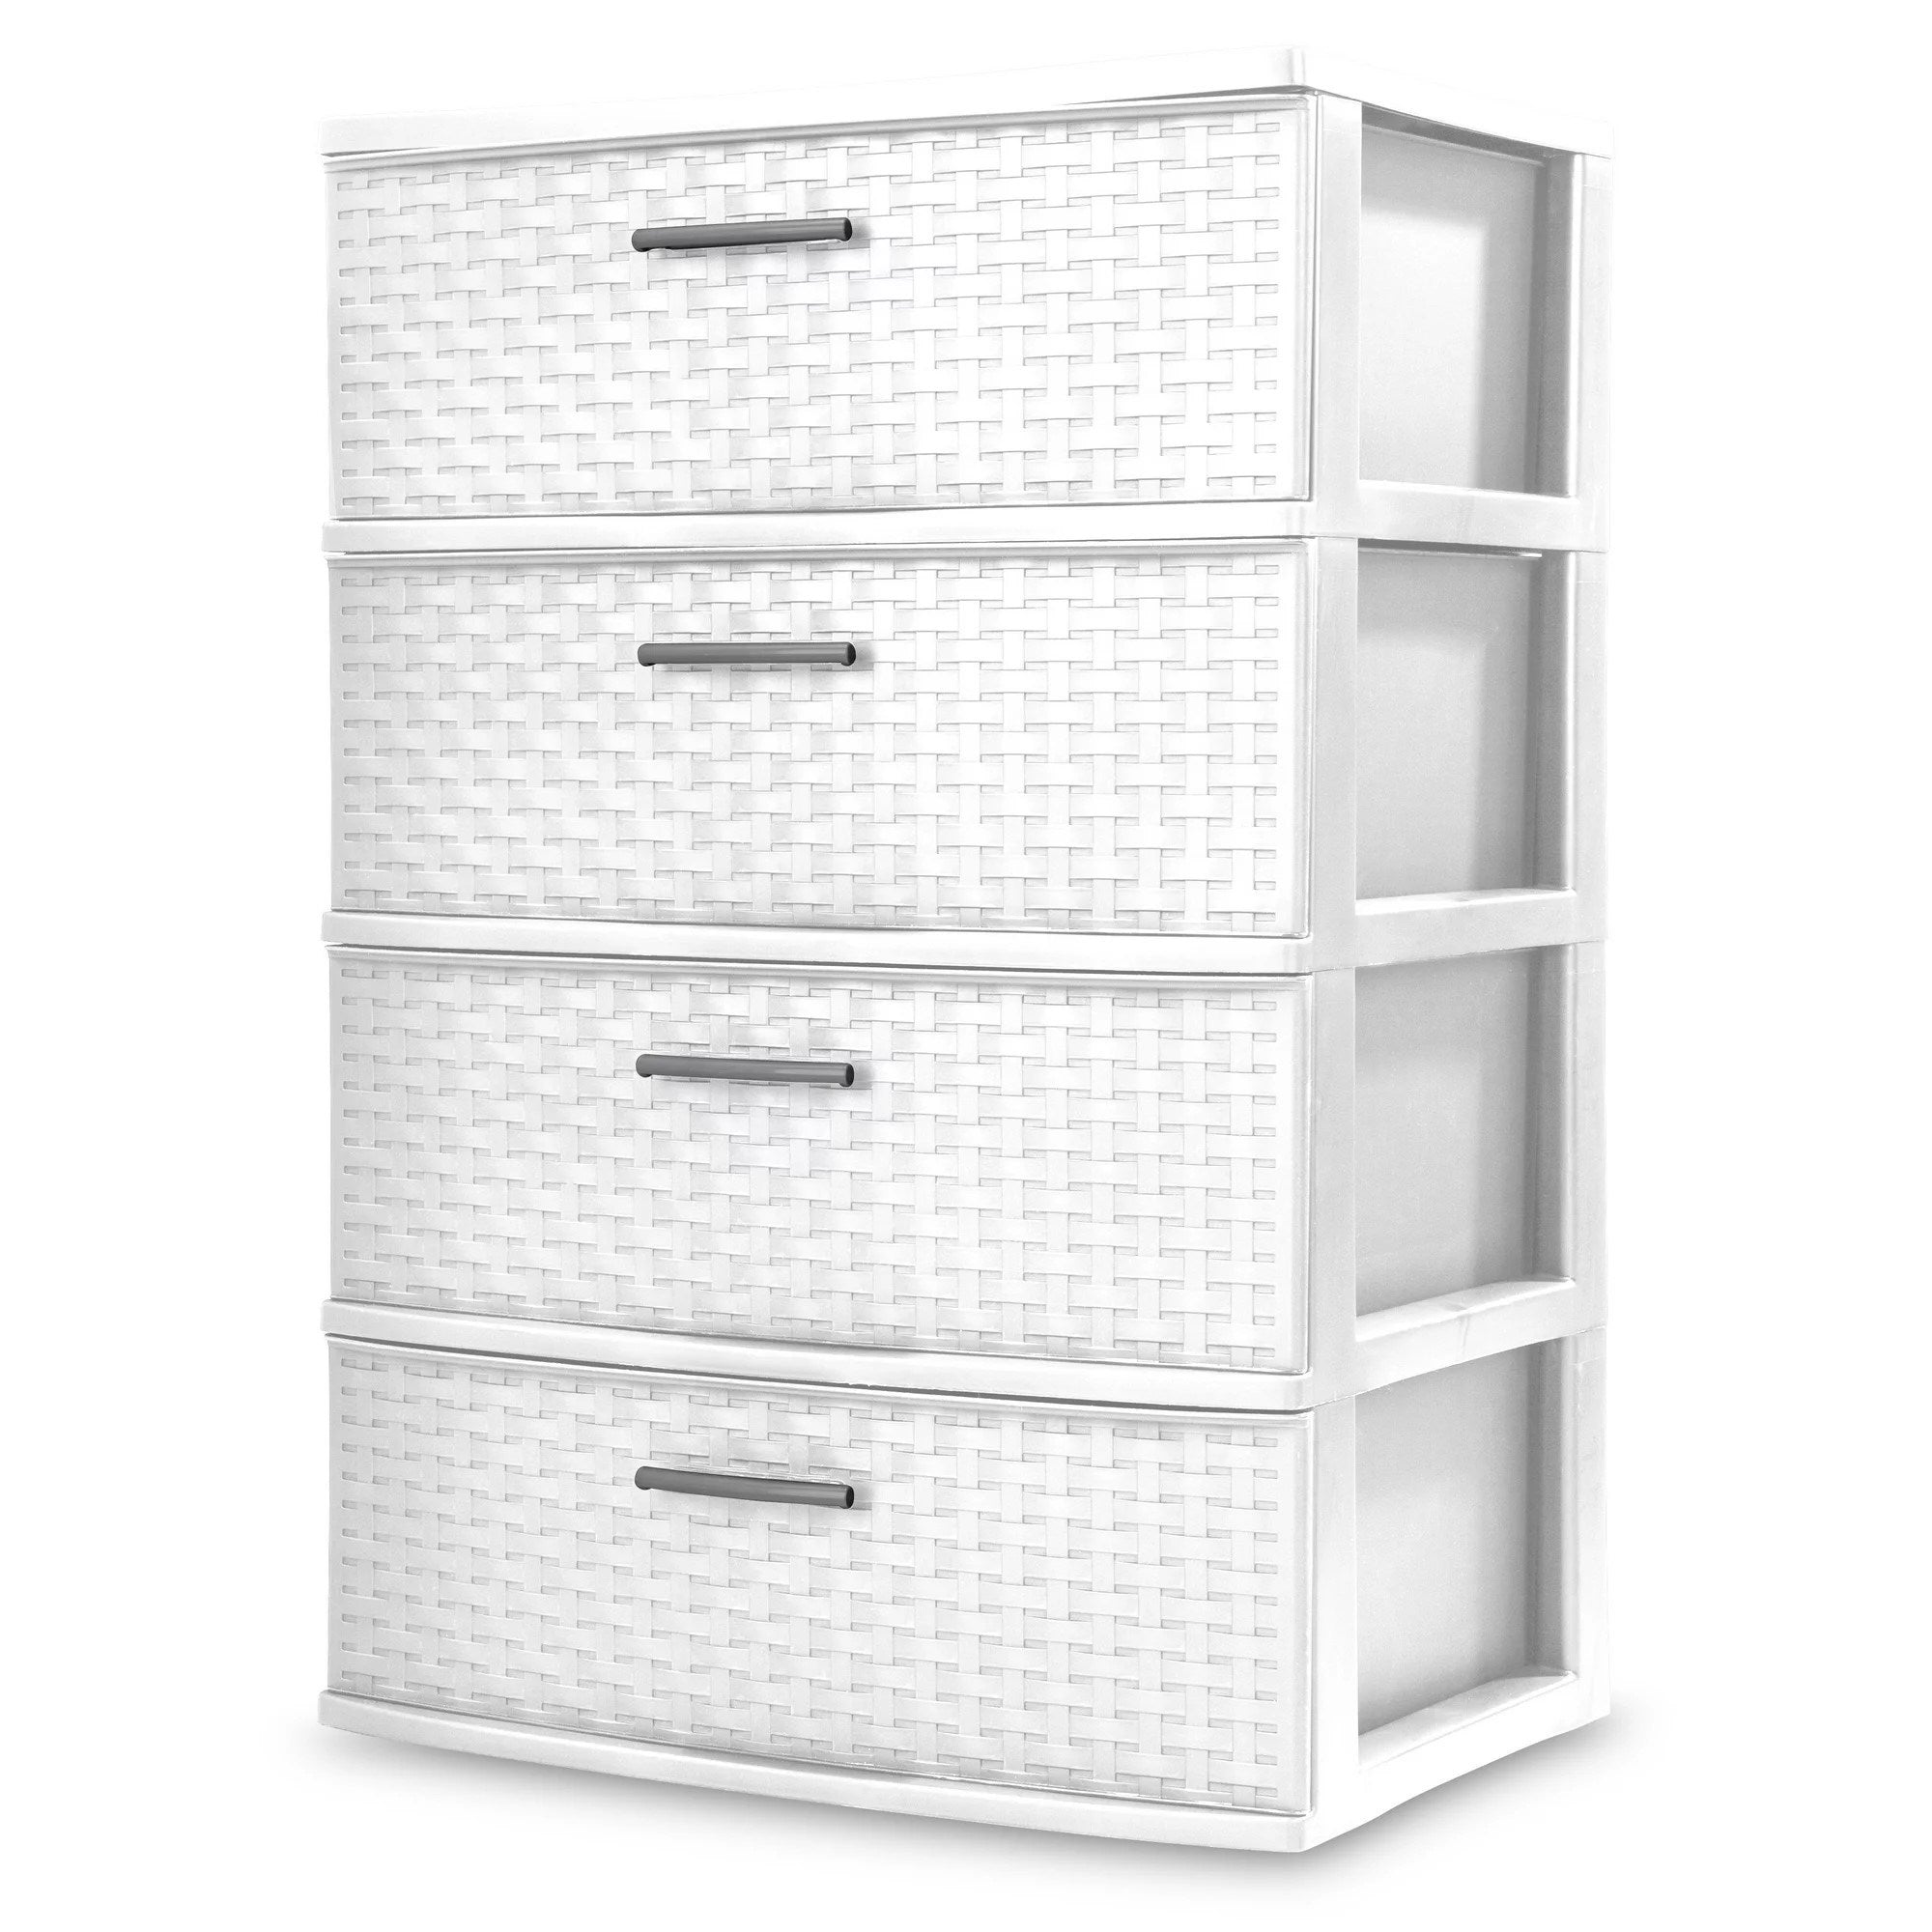 A woven 4 drawer wide weave tower decoration storage cabinet with gray drawers.